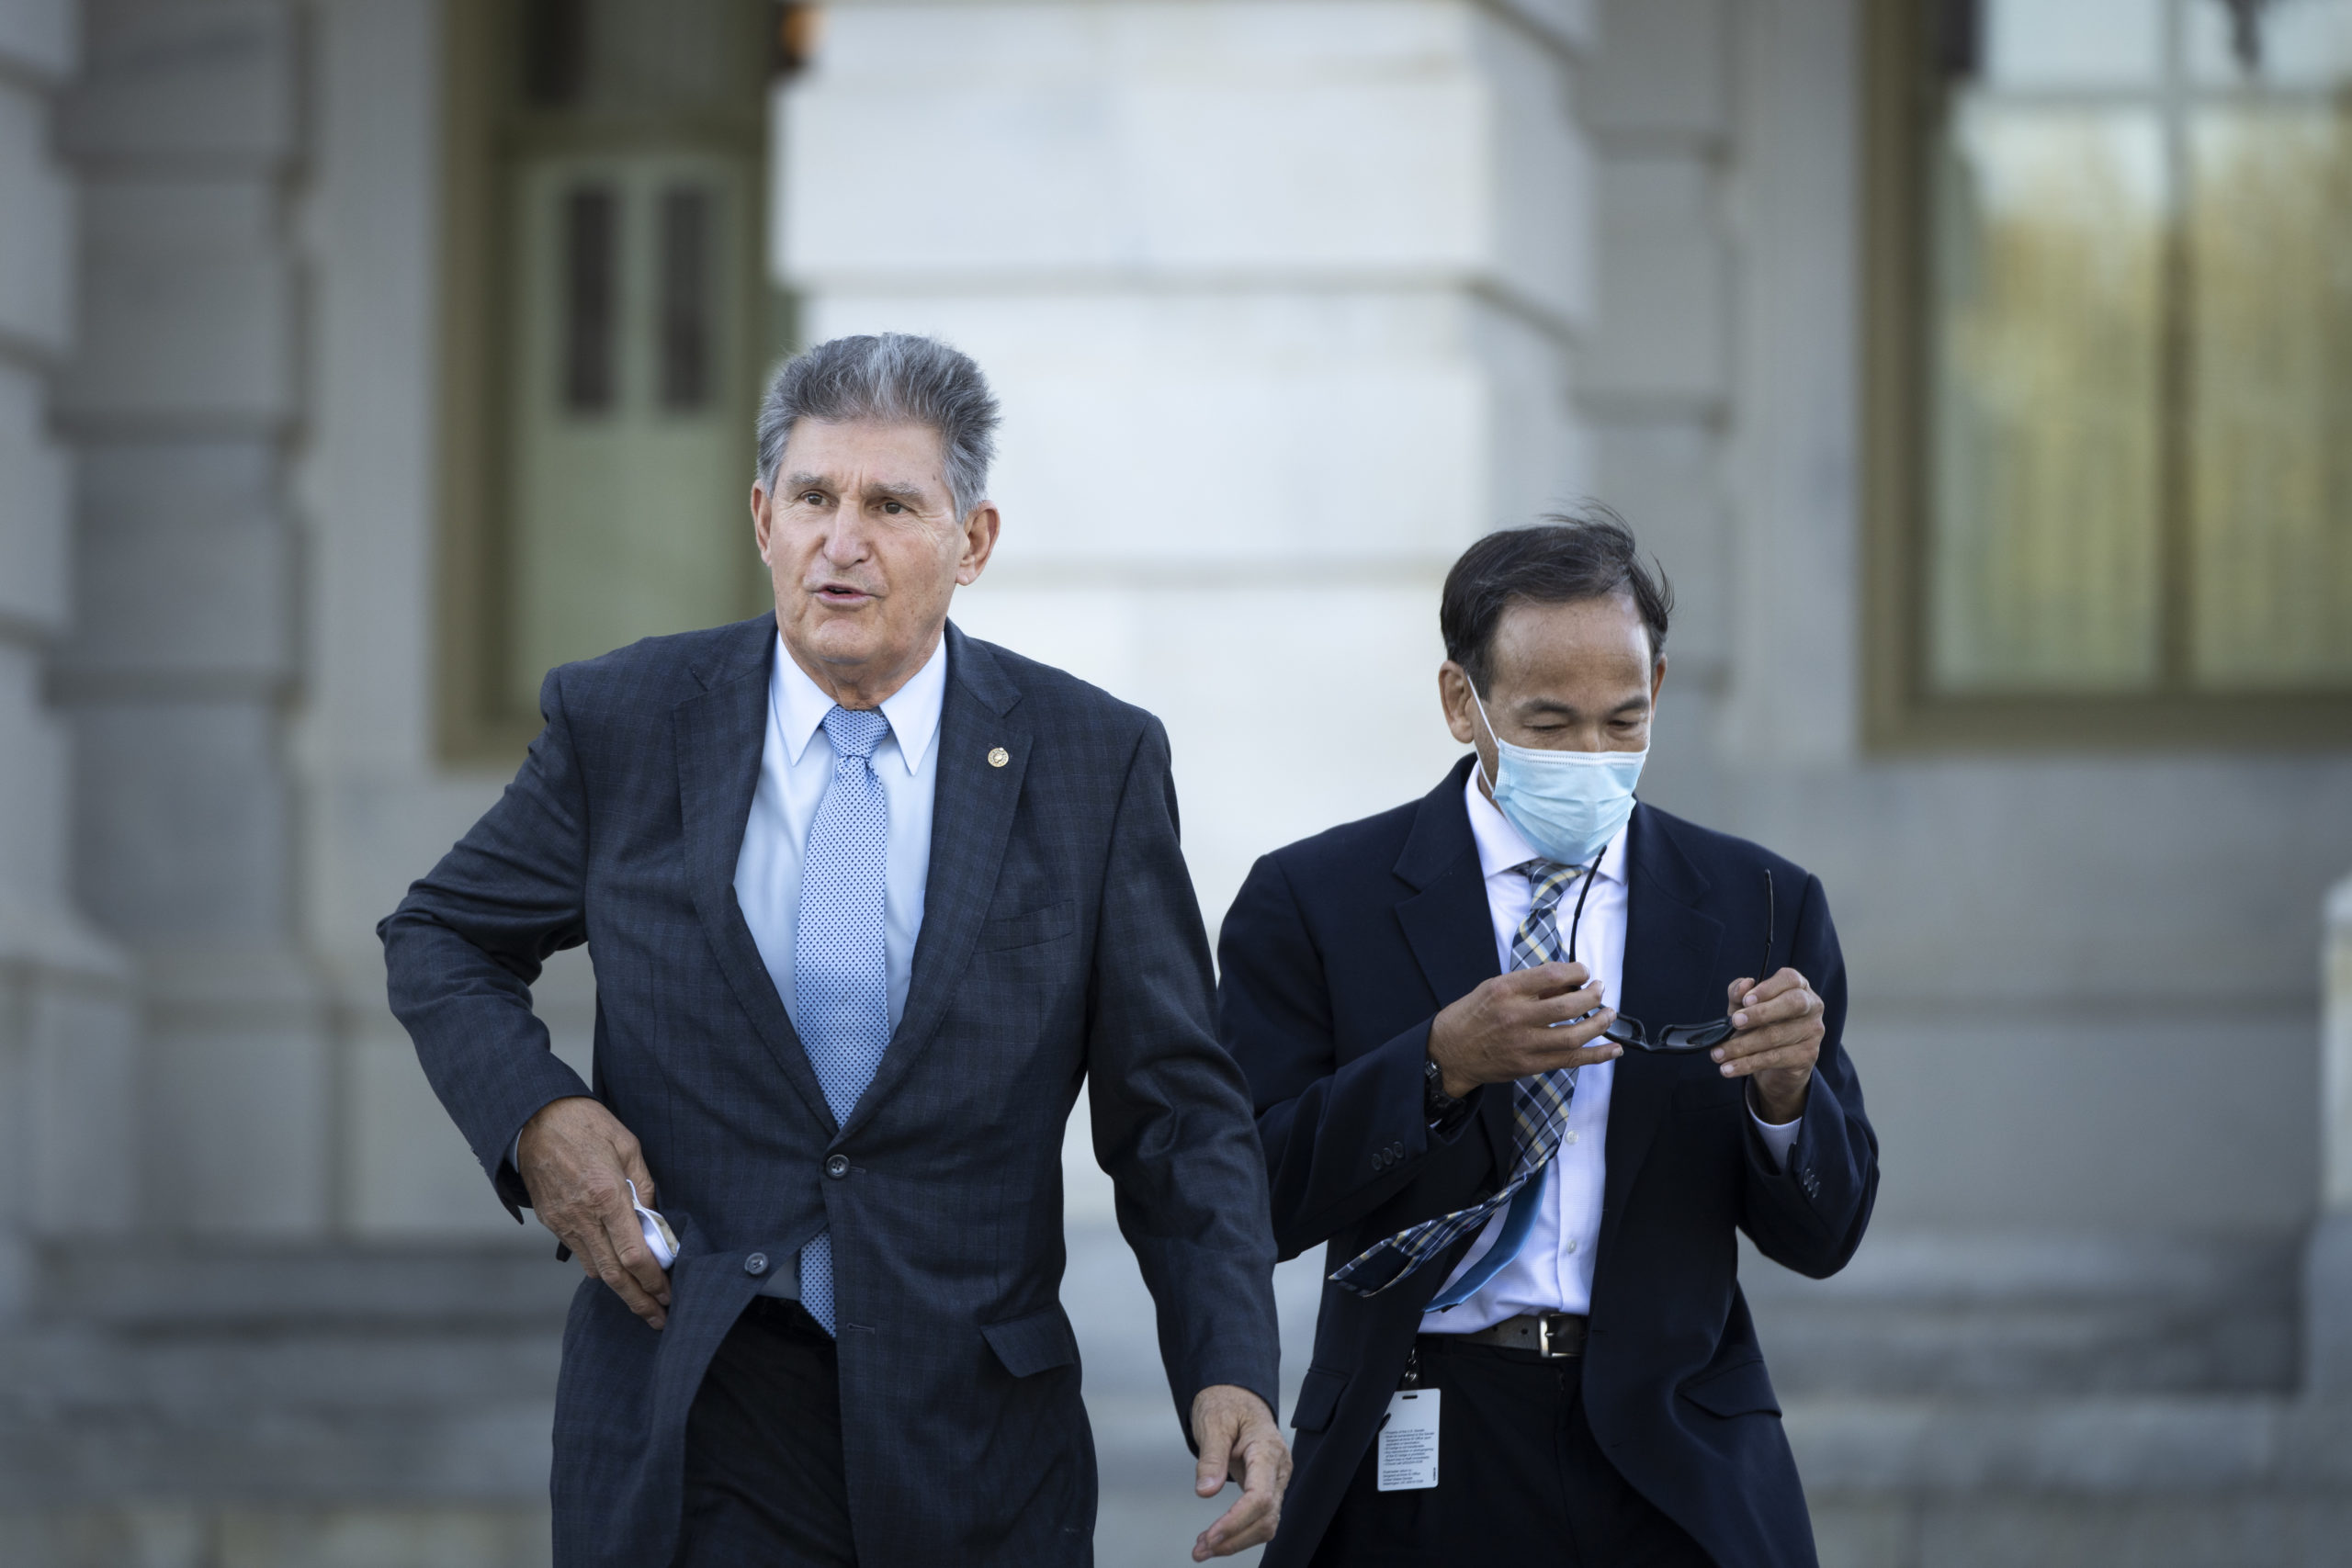 WASHINGTON, DC - OCTOBER 27: Sen. Joe Manchin (D-WV) leaves the U.S. Capitol after a vote October 27, 2021 in Washington, DC. Democrats are continuing internal negotiations about the Biden administration's social policy spending bill. (Photo by Drew Angerer/Getty Images)